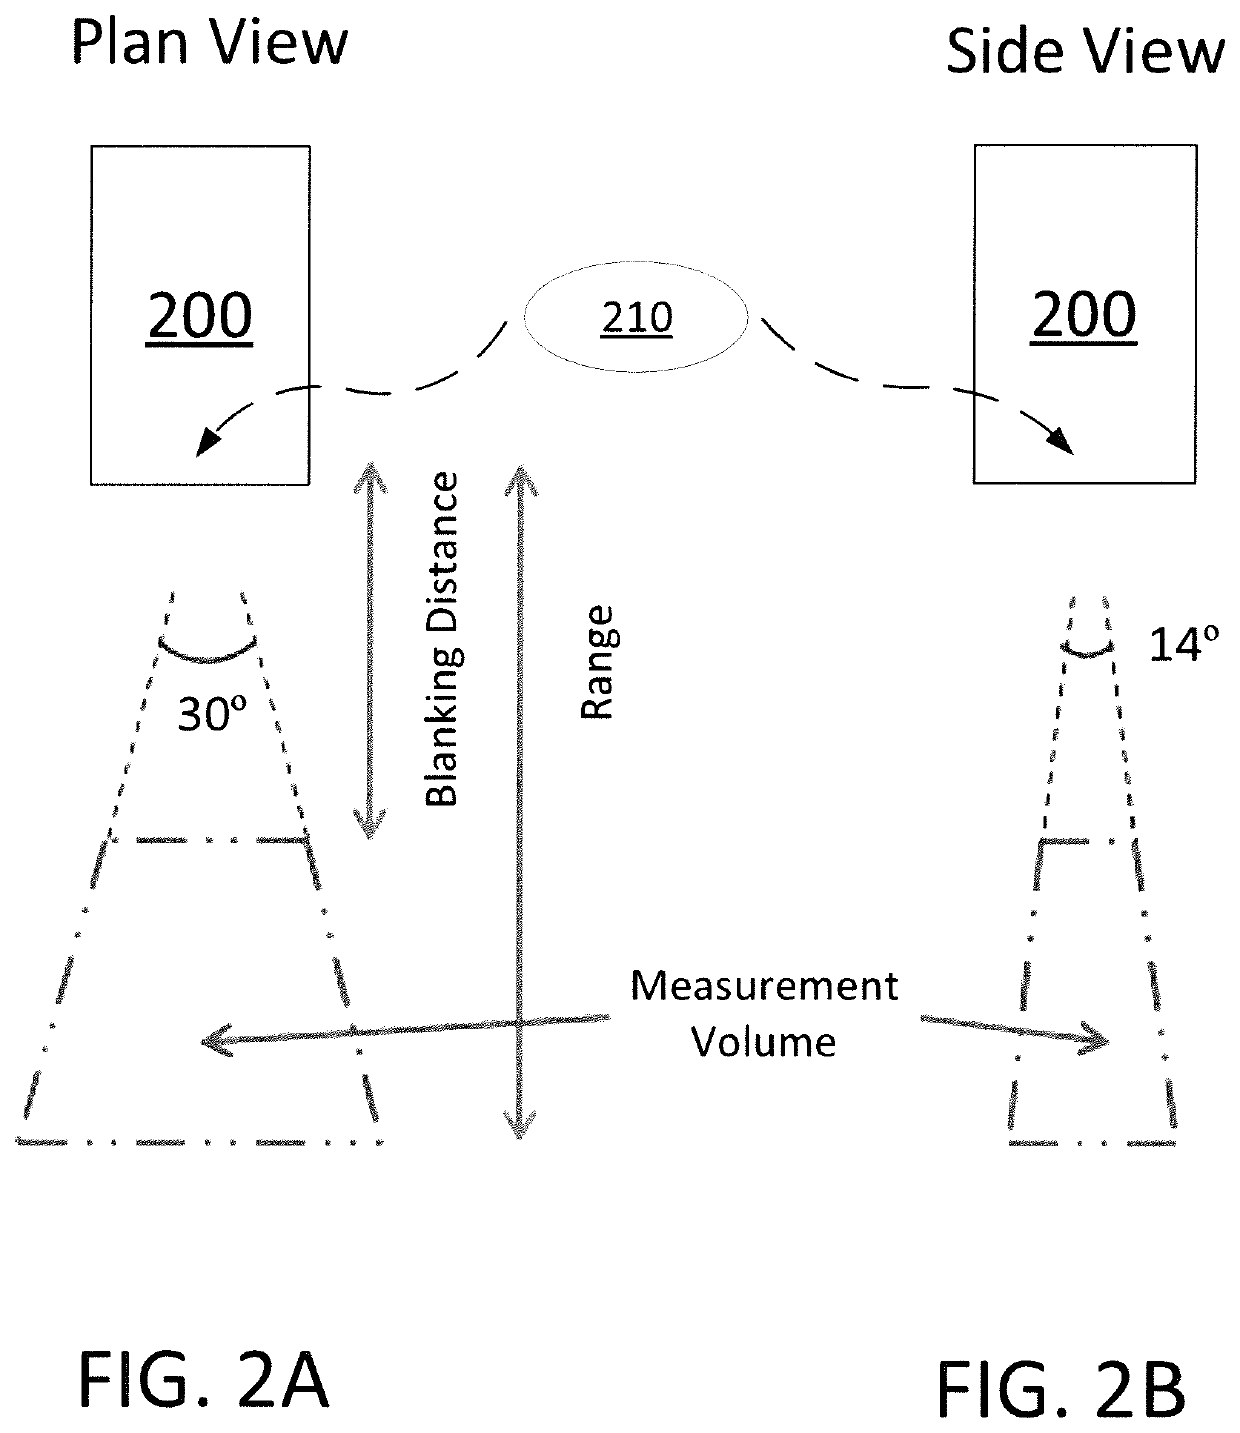 Acoustic camera systems and methods for large scale flow analysis in turbid field environments